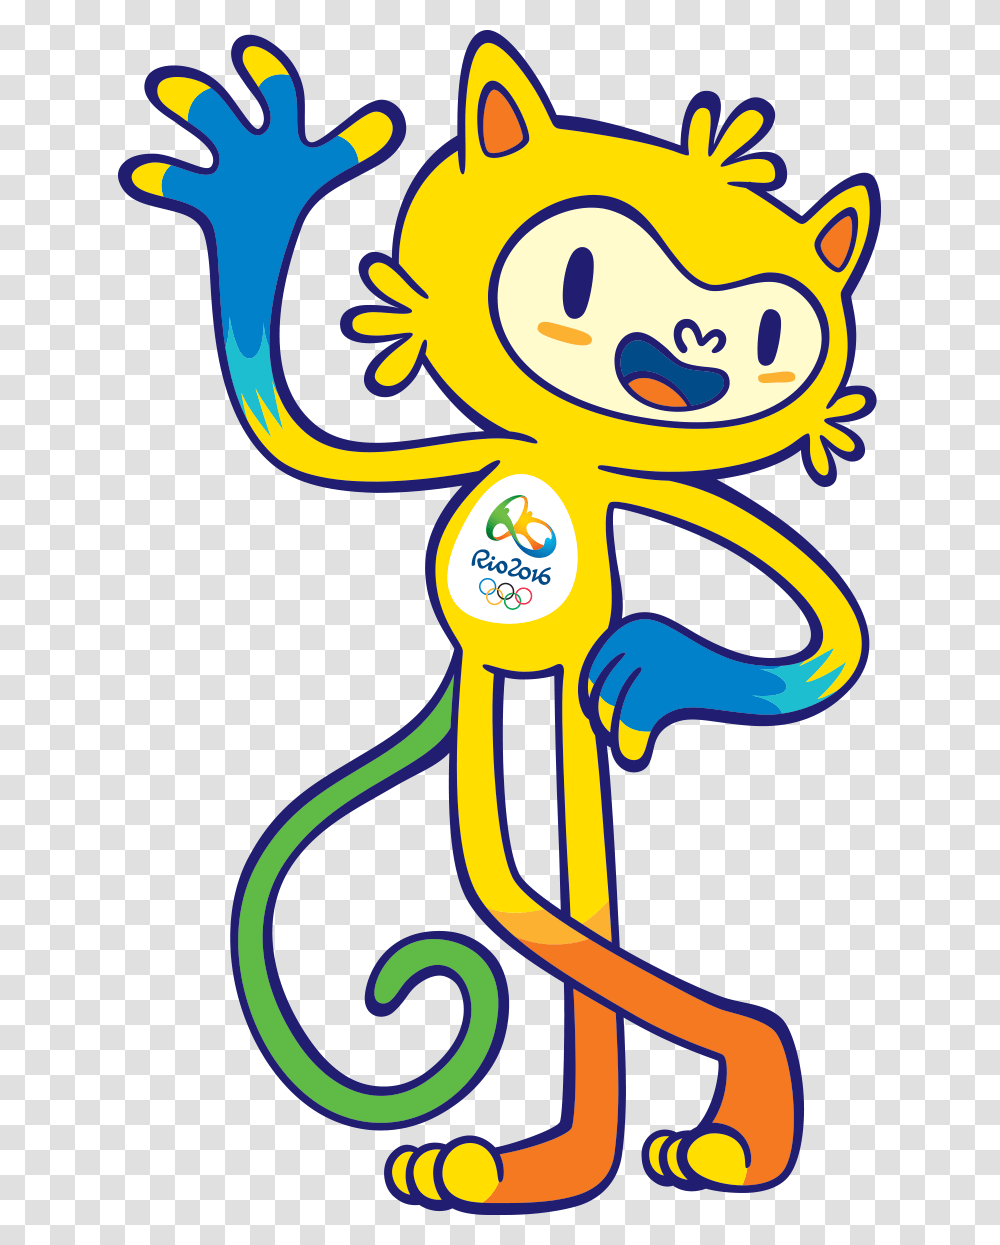 Medals Clipart Rio Olympics 2016 Olympic Games Mascot, Animal, Light, Label Transparent Png